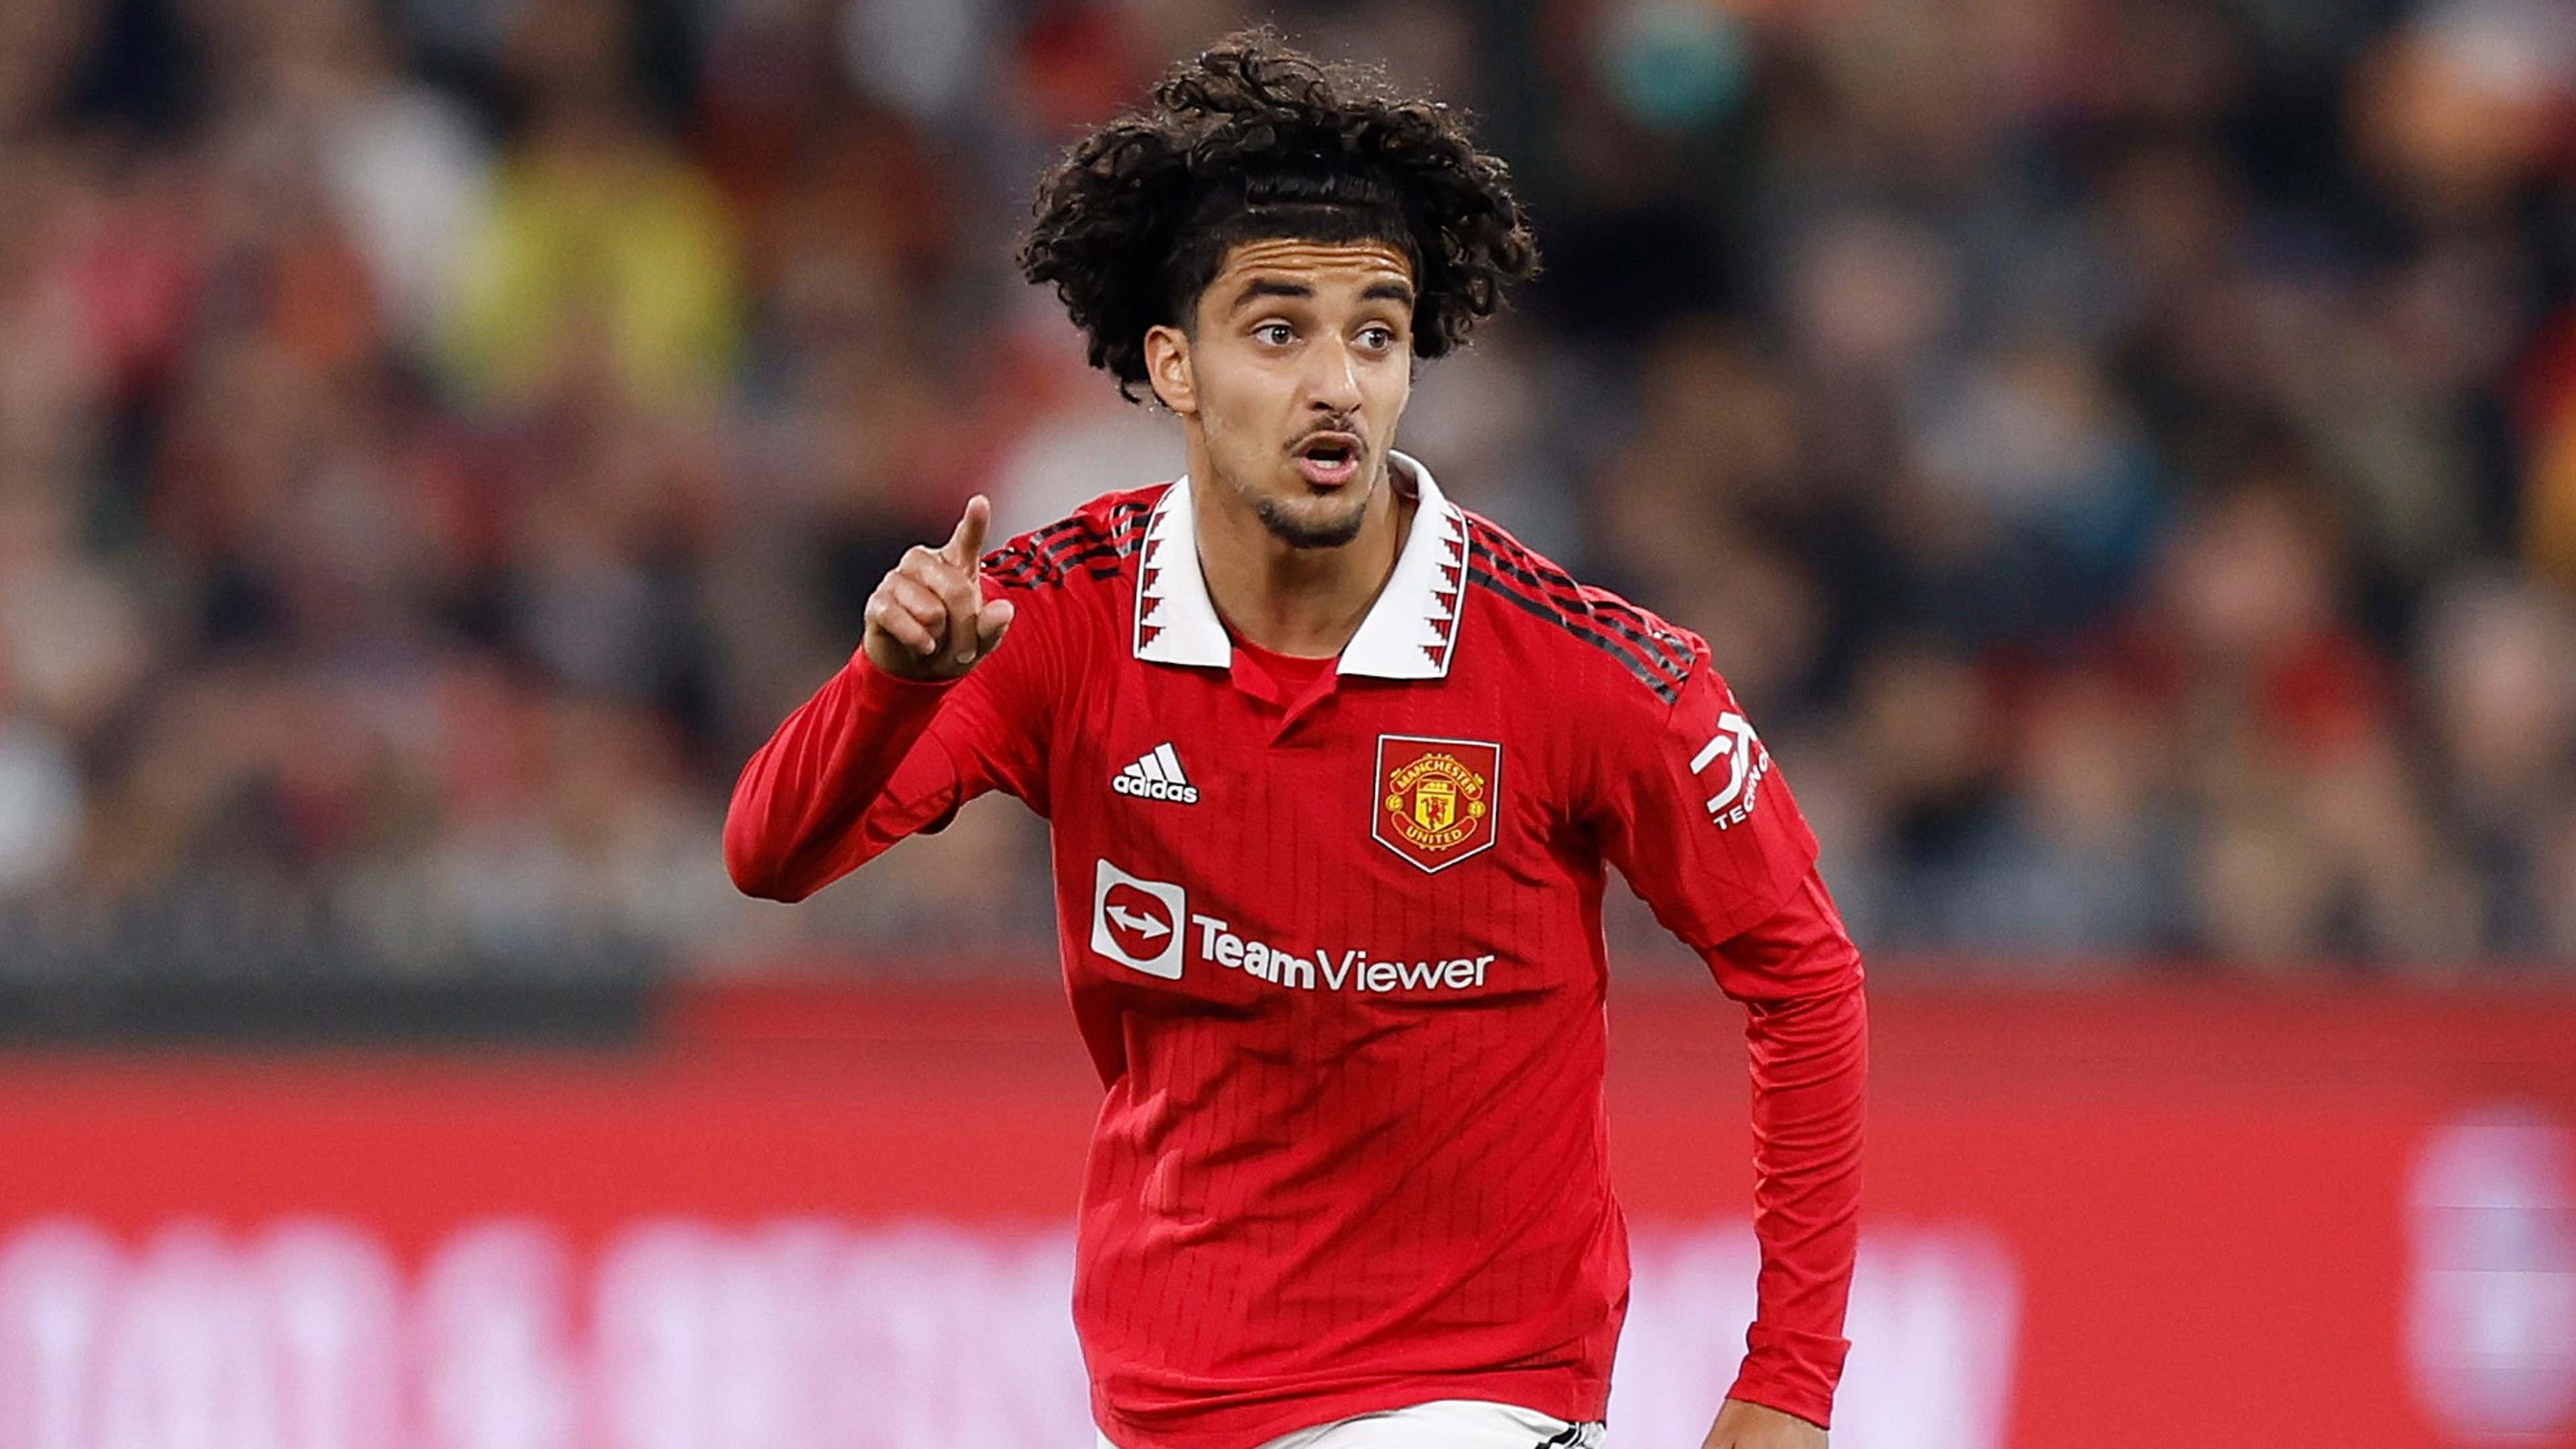 Revealed: Key Man Utd clauses inserted into Zidane Iqbal's contract following midfielder's £850,000 transfer to FC Utrecht | Goal.com Nigeria